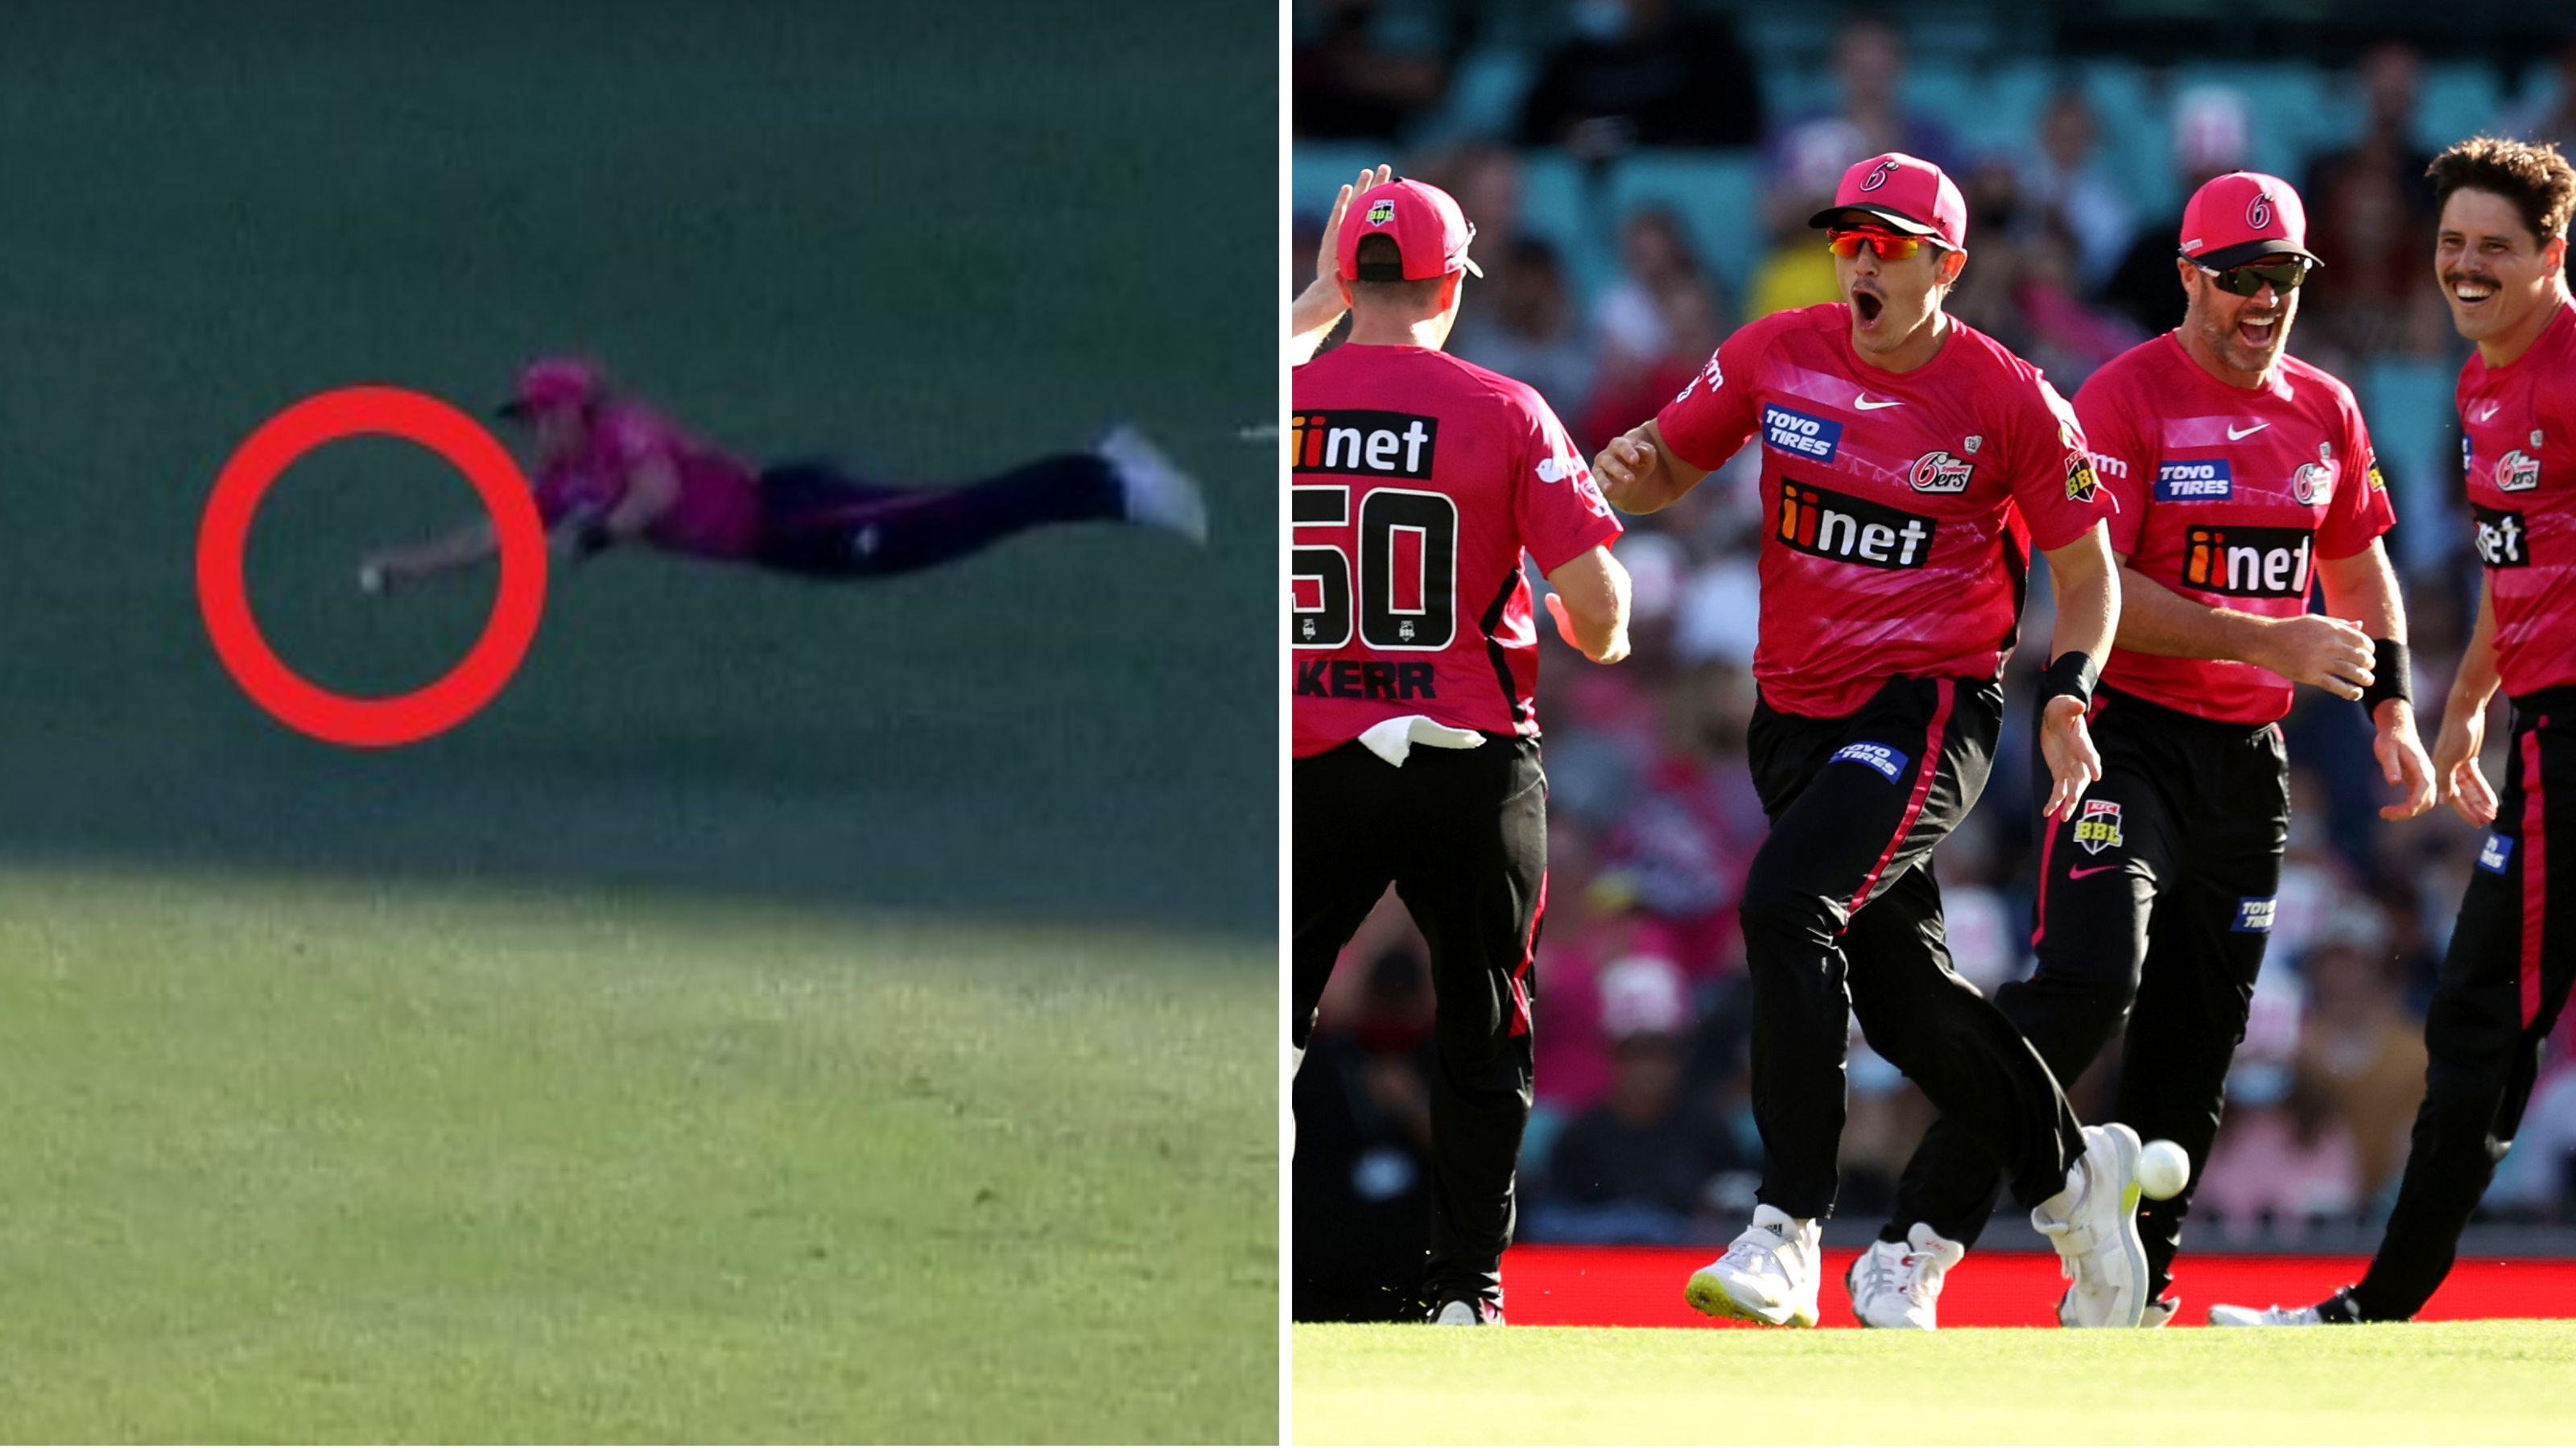 Sydney Sixers 'Superman' Sean Abbott stuns with 'one of the catches of the decade'